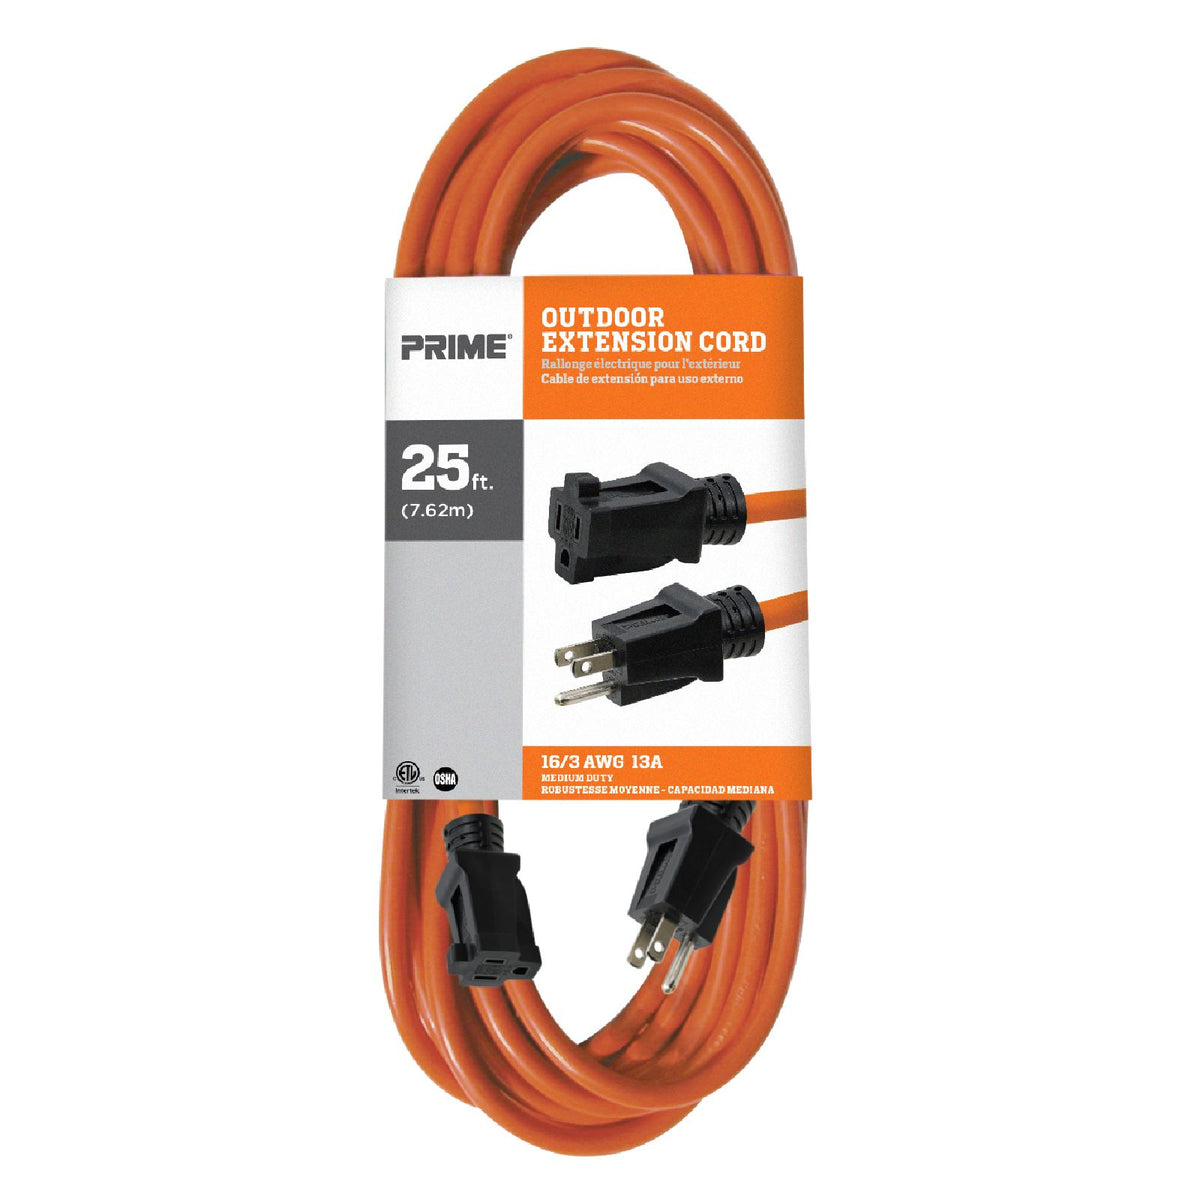 UL Sjtw Sjtow Sjtoow 3p-320r Plug 25FT Heavy Duty Waterproof Extension Cord  Replacement Electric Power Cable for Outdoor/Indoor Weather Resistant -  China Cord, Cable